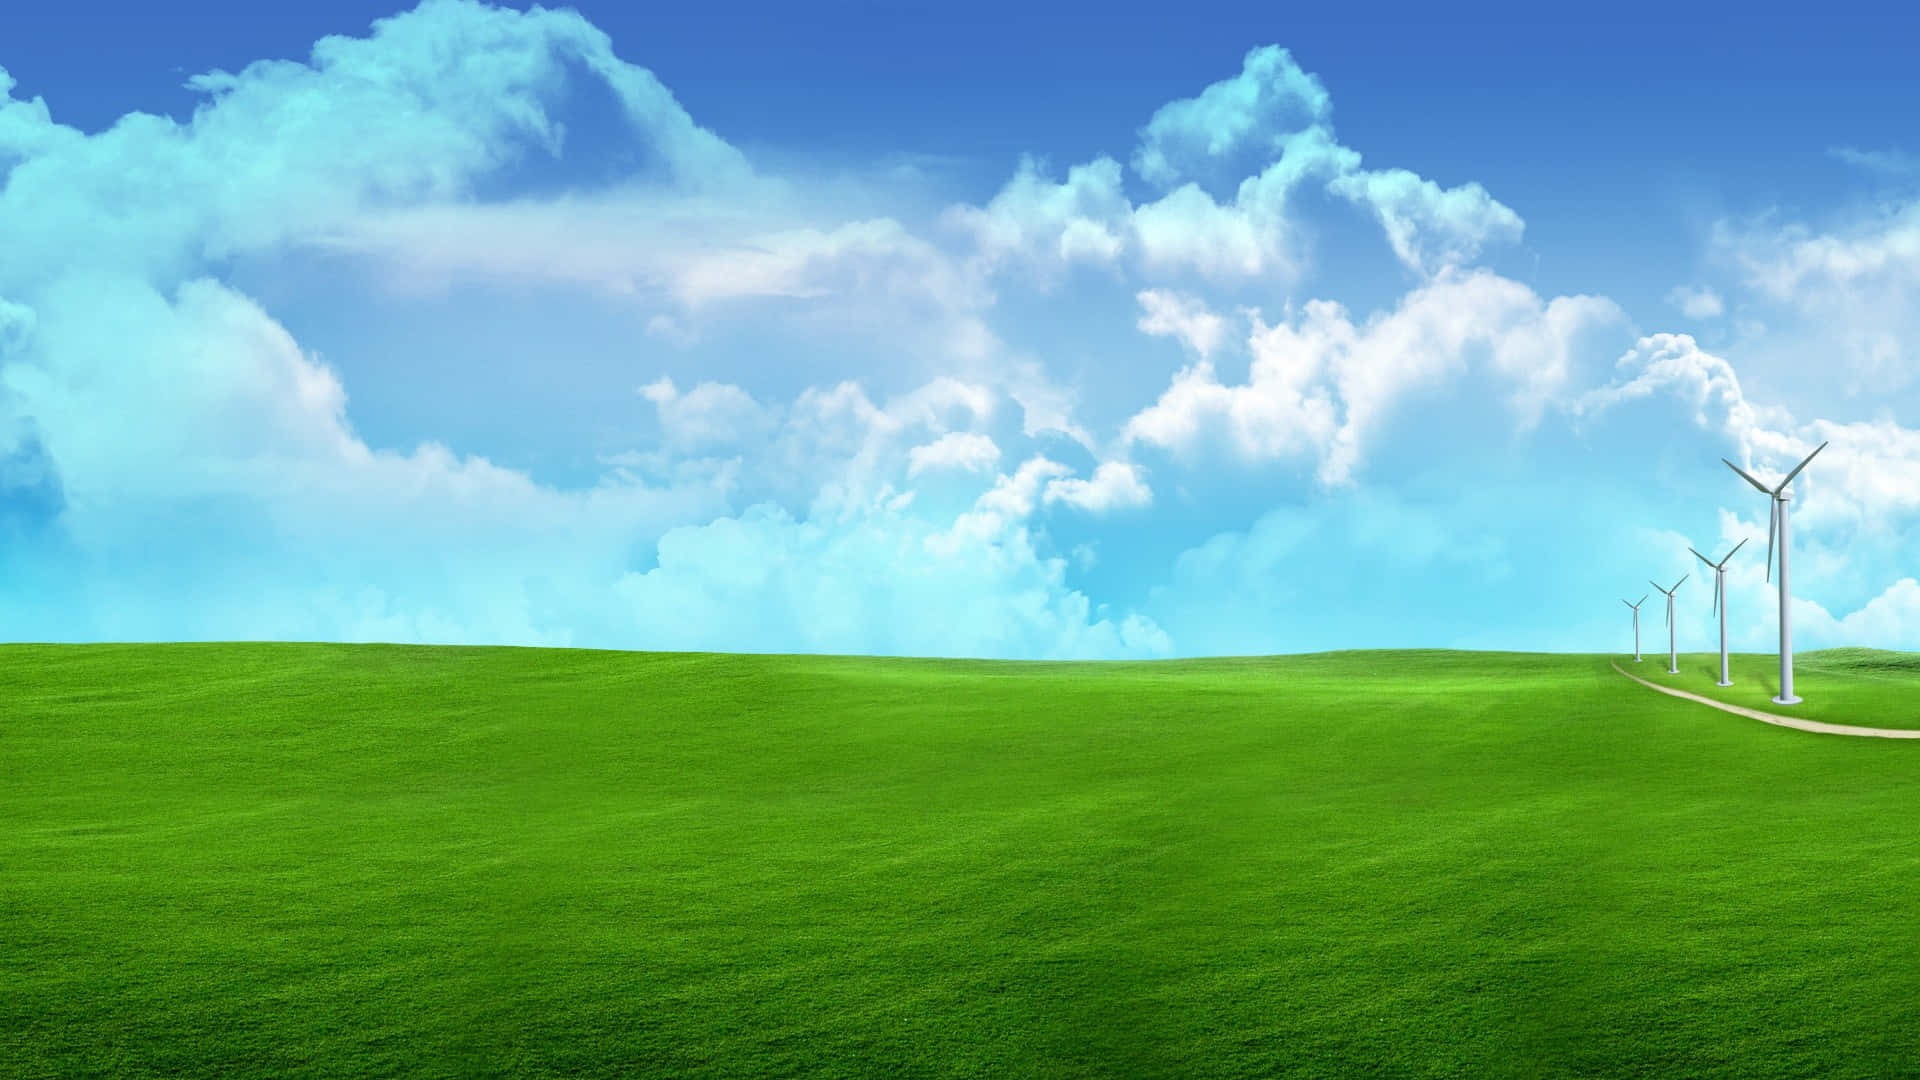 Serene Breeze on a Bright Day Wallpaper